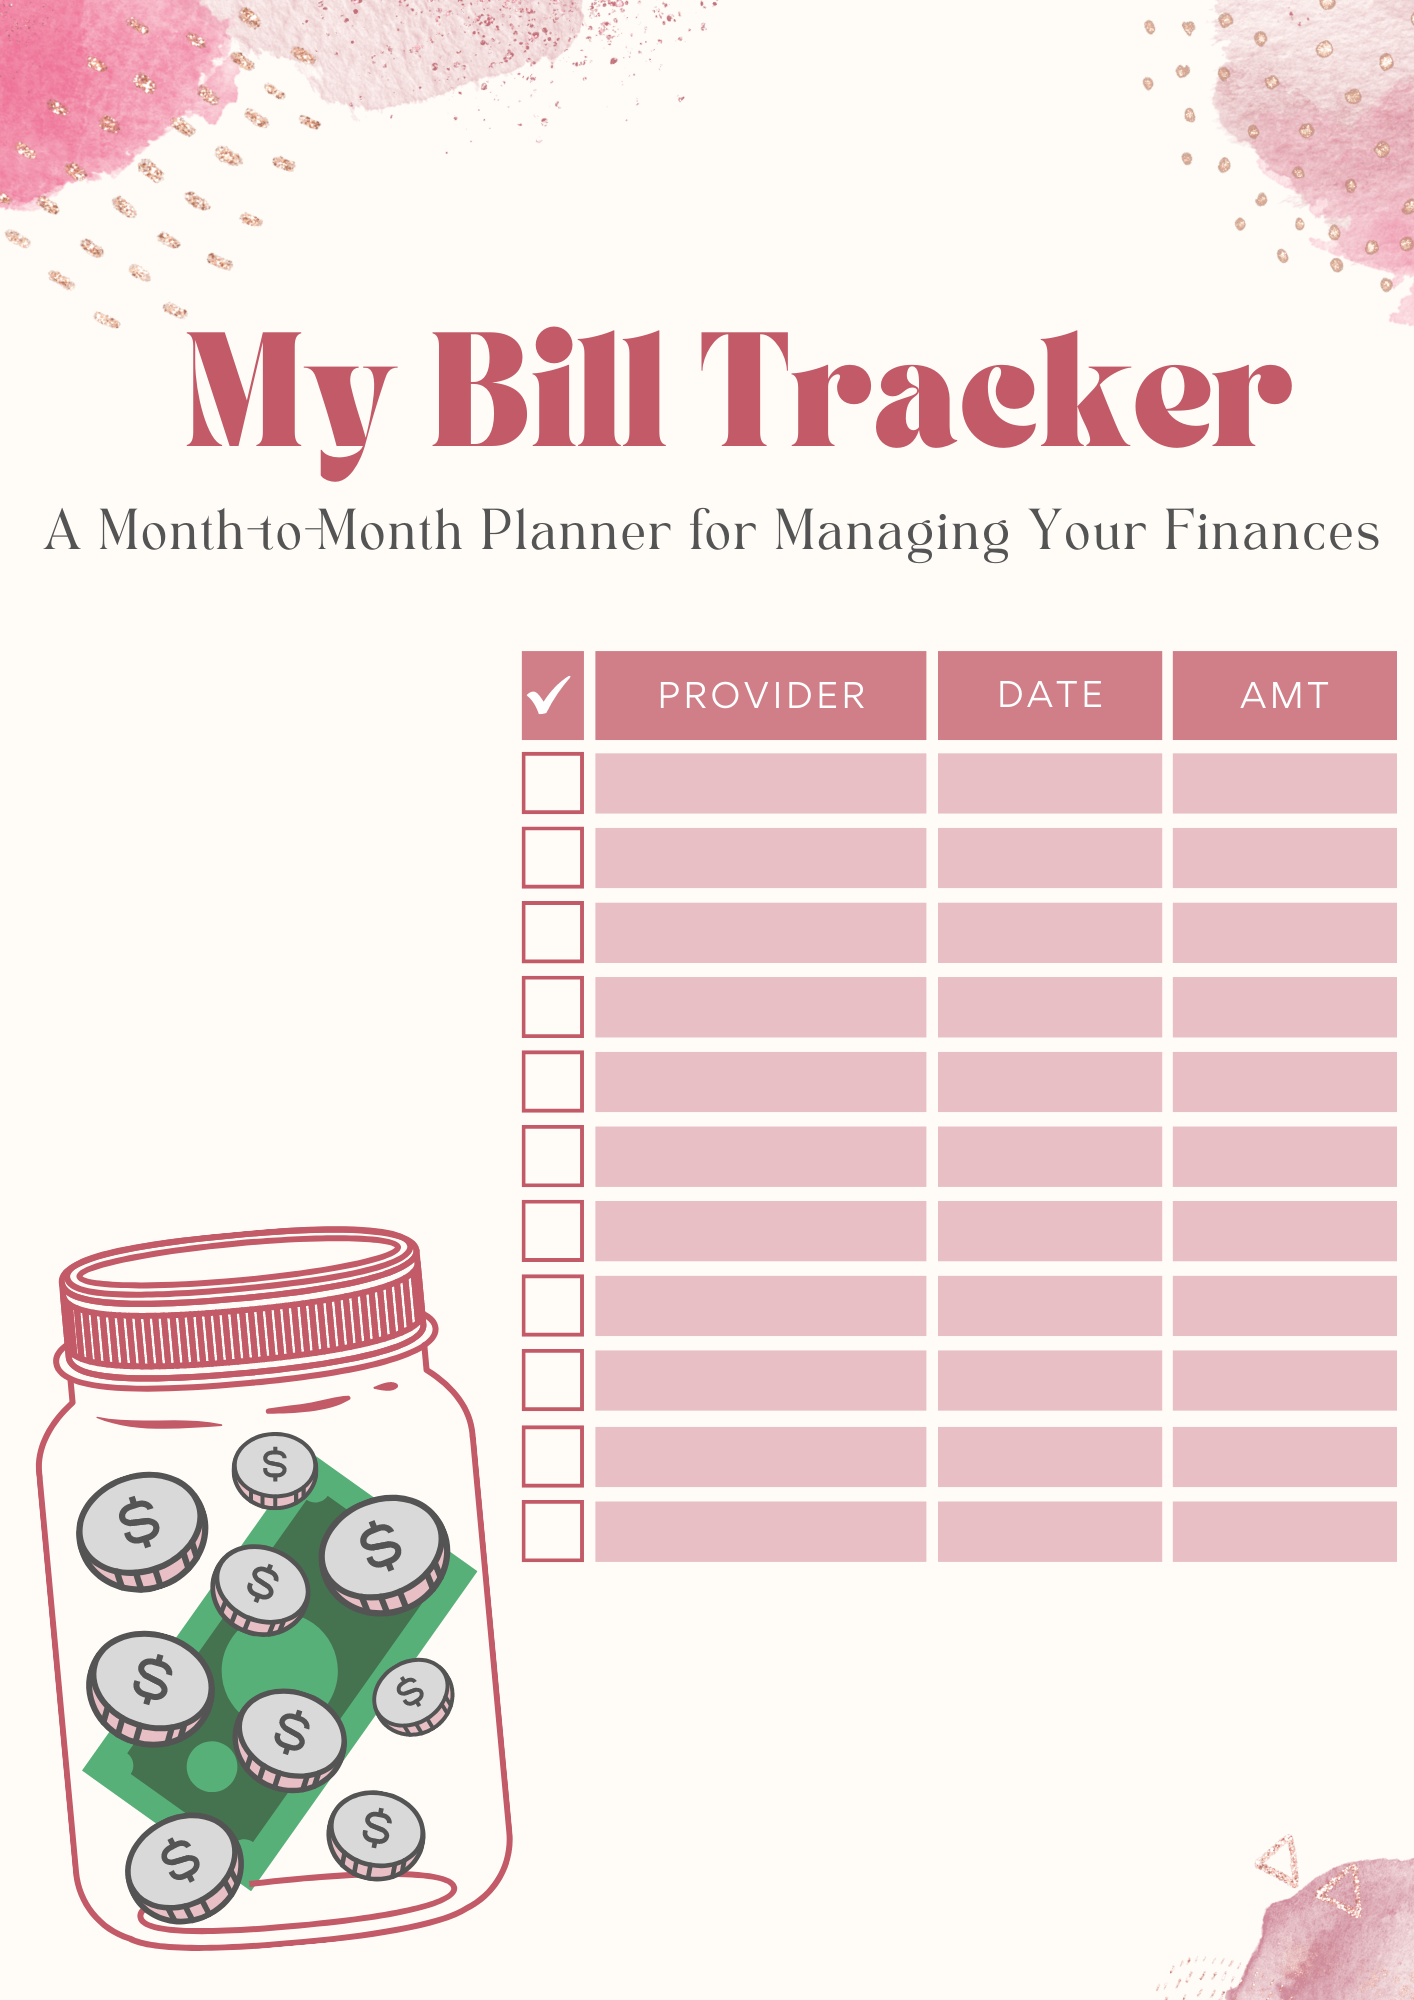 My Bill Tracker by Content Visionary